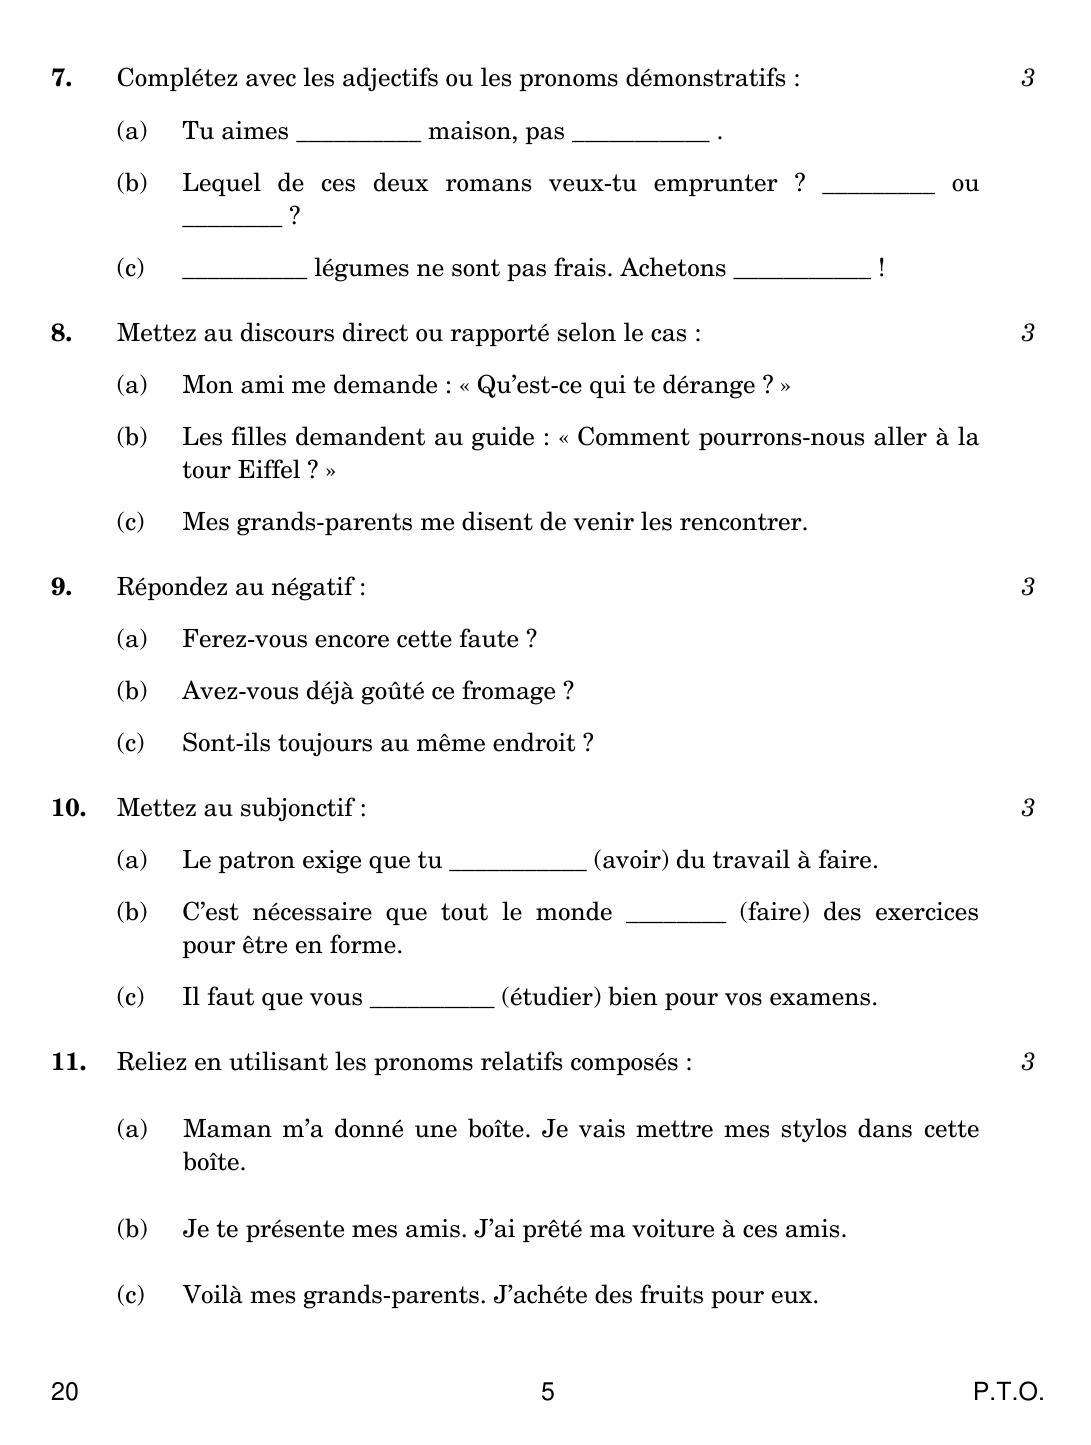 CBSE Class 10 20 French 2019 Compartment Question Paper - Page 5